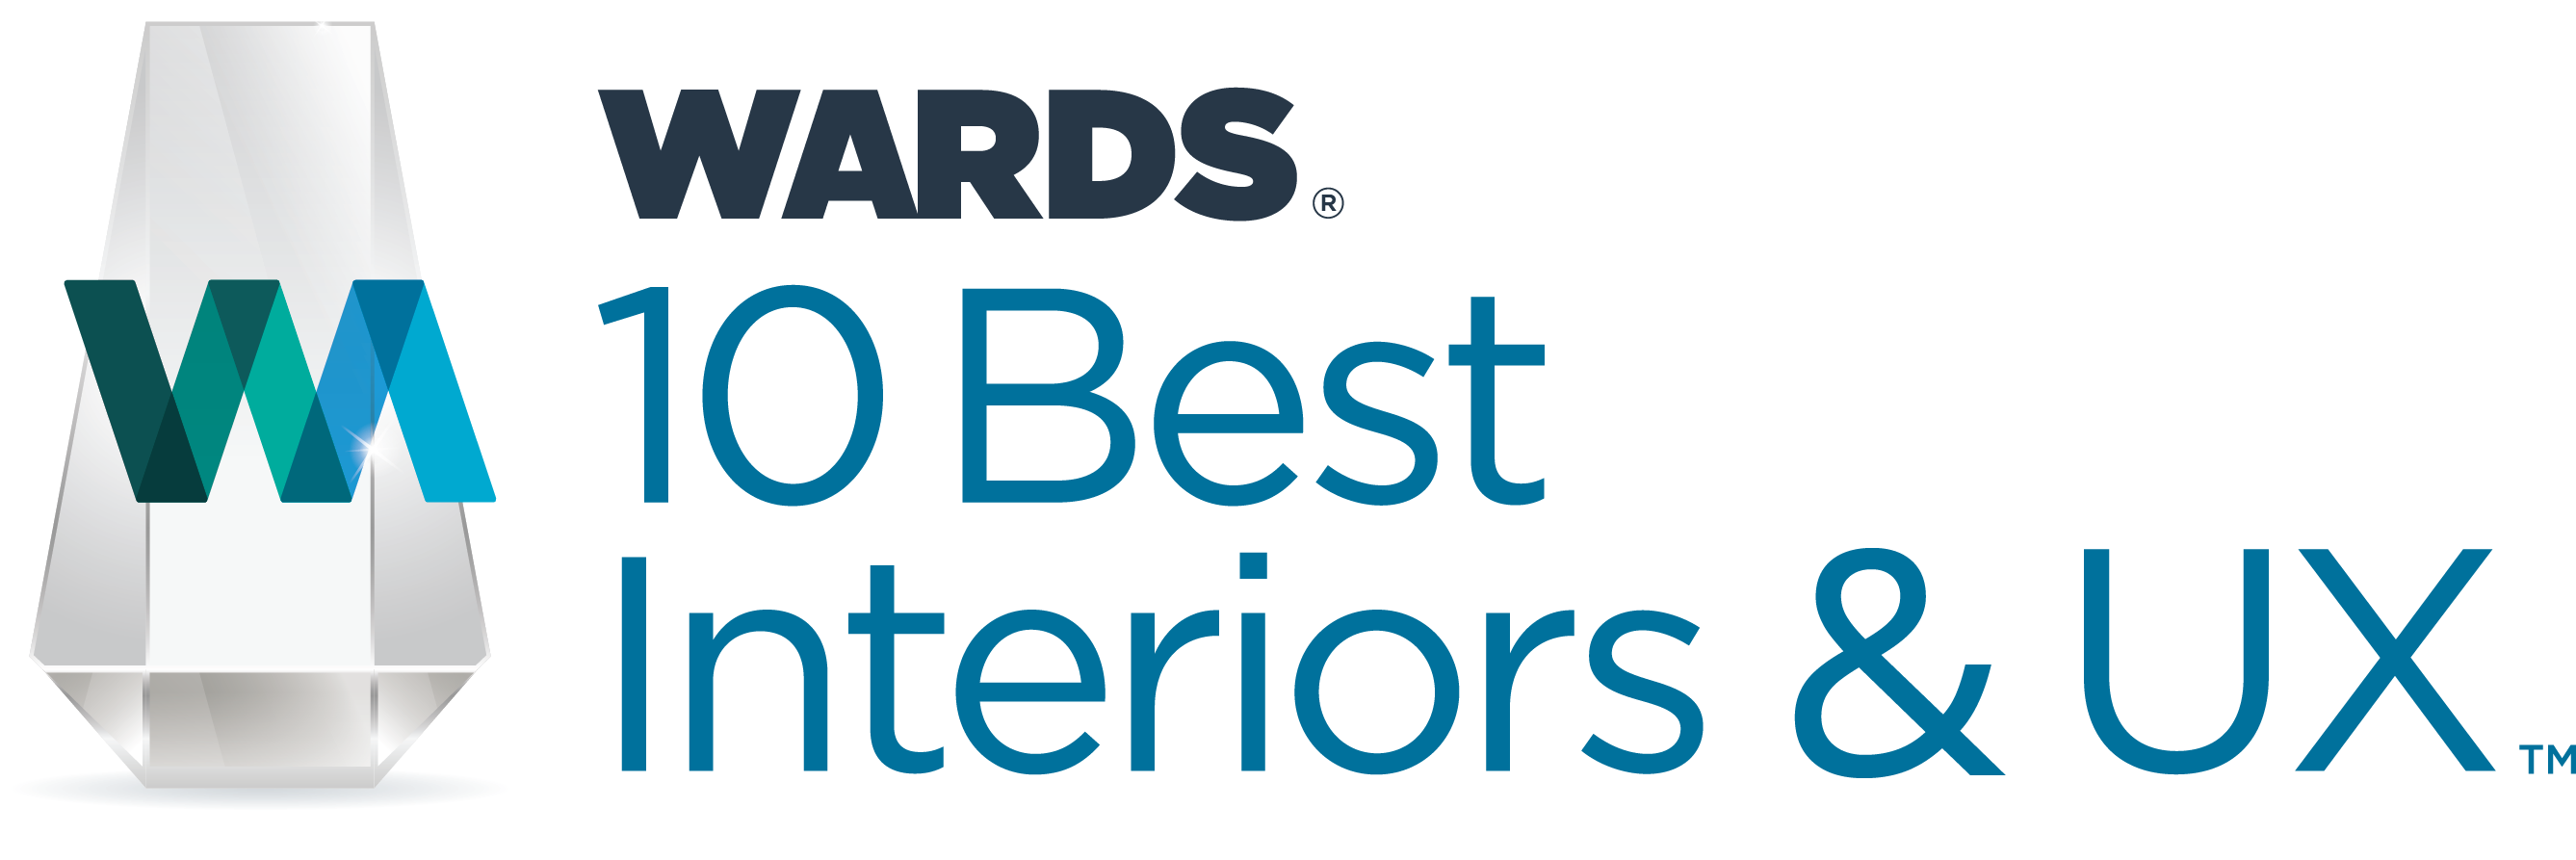 Wards 10 Best Interiors & UX Award Earned by the 2023 Kia Sportage